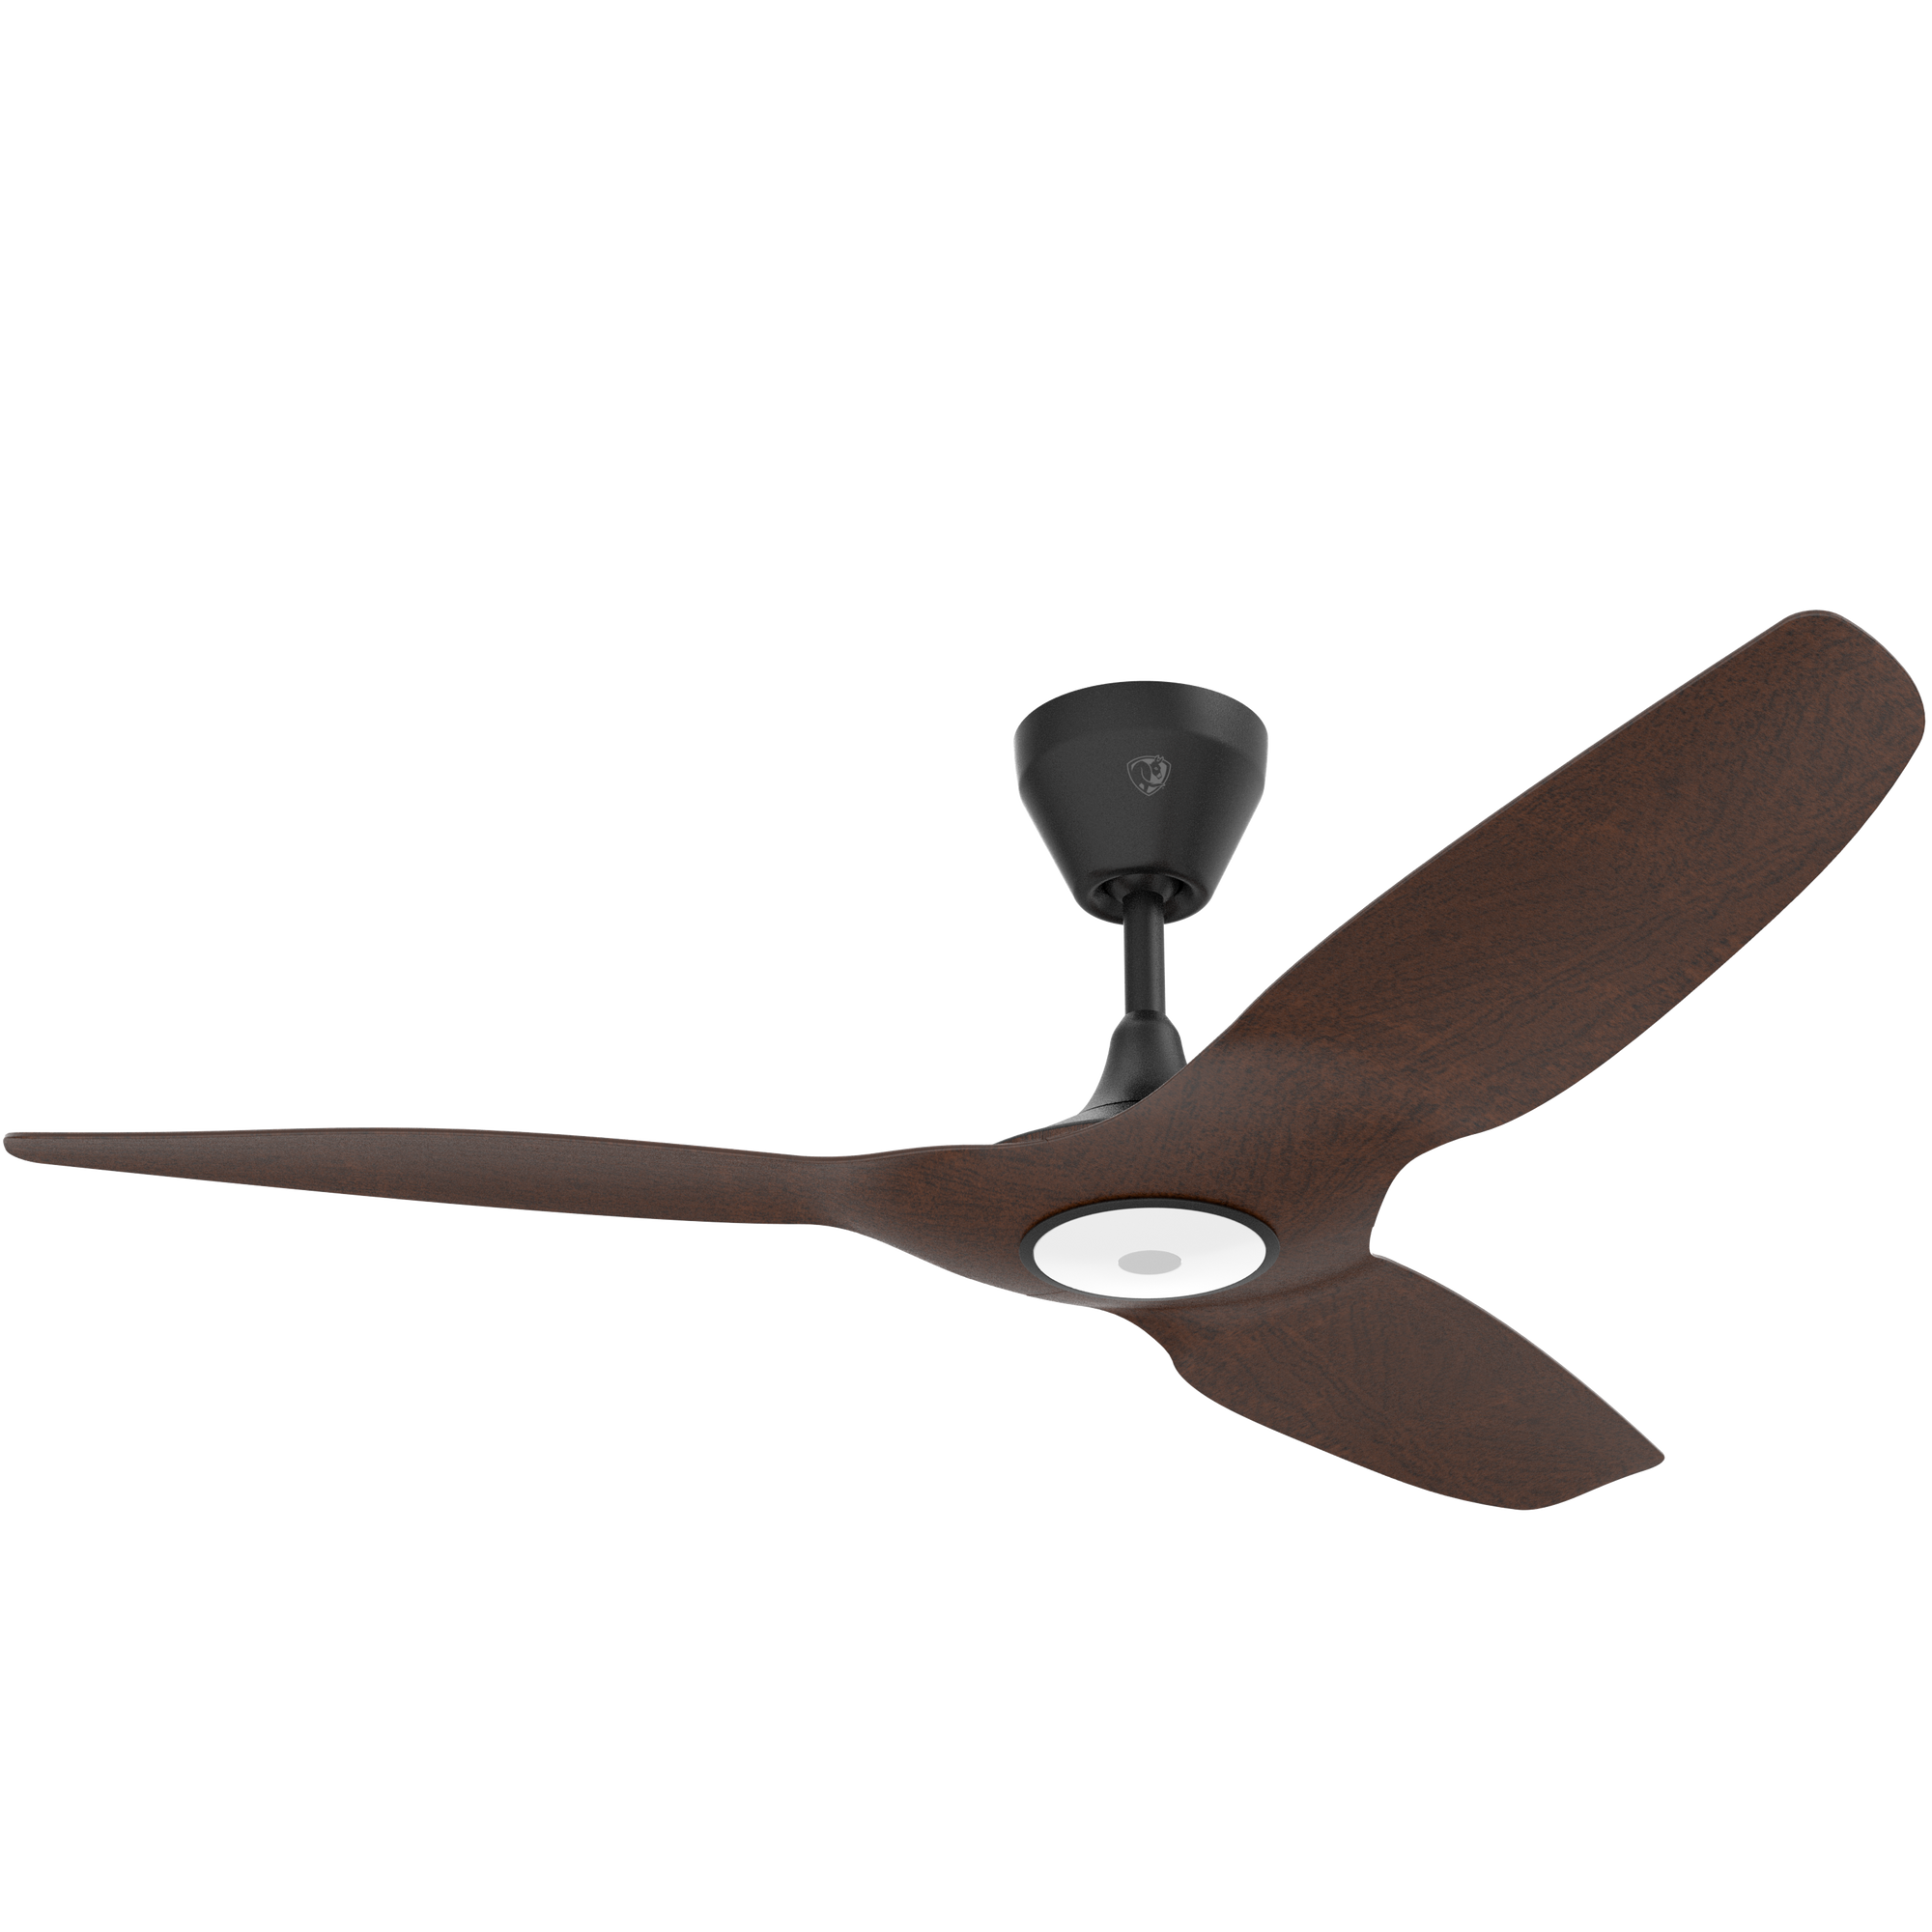 Big Ass Fans Haiku L 52" Ceiling Fan with Cocoa Bamboo Blades and Black Finish, Downrod 5"